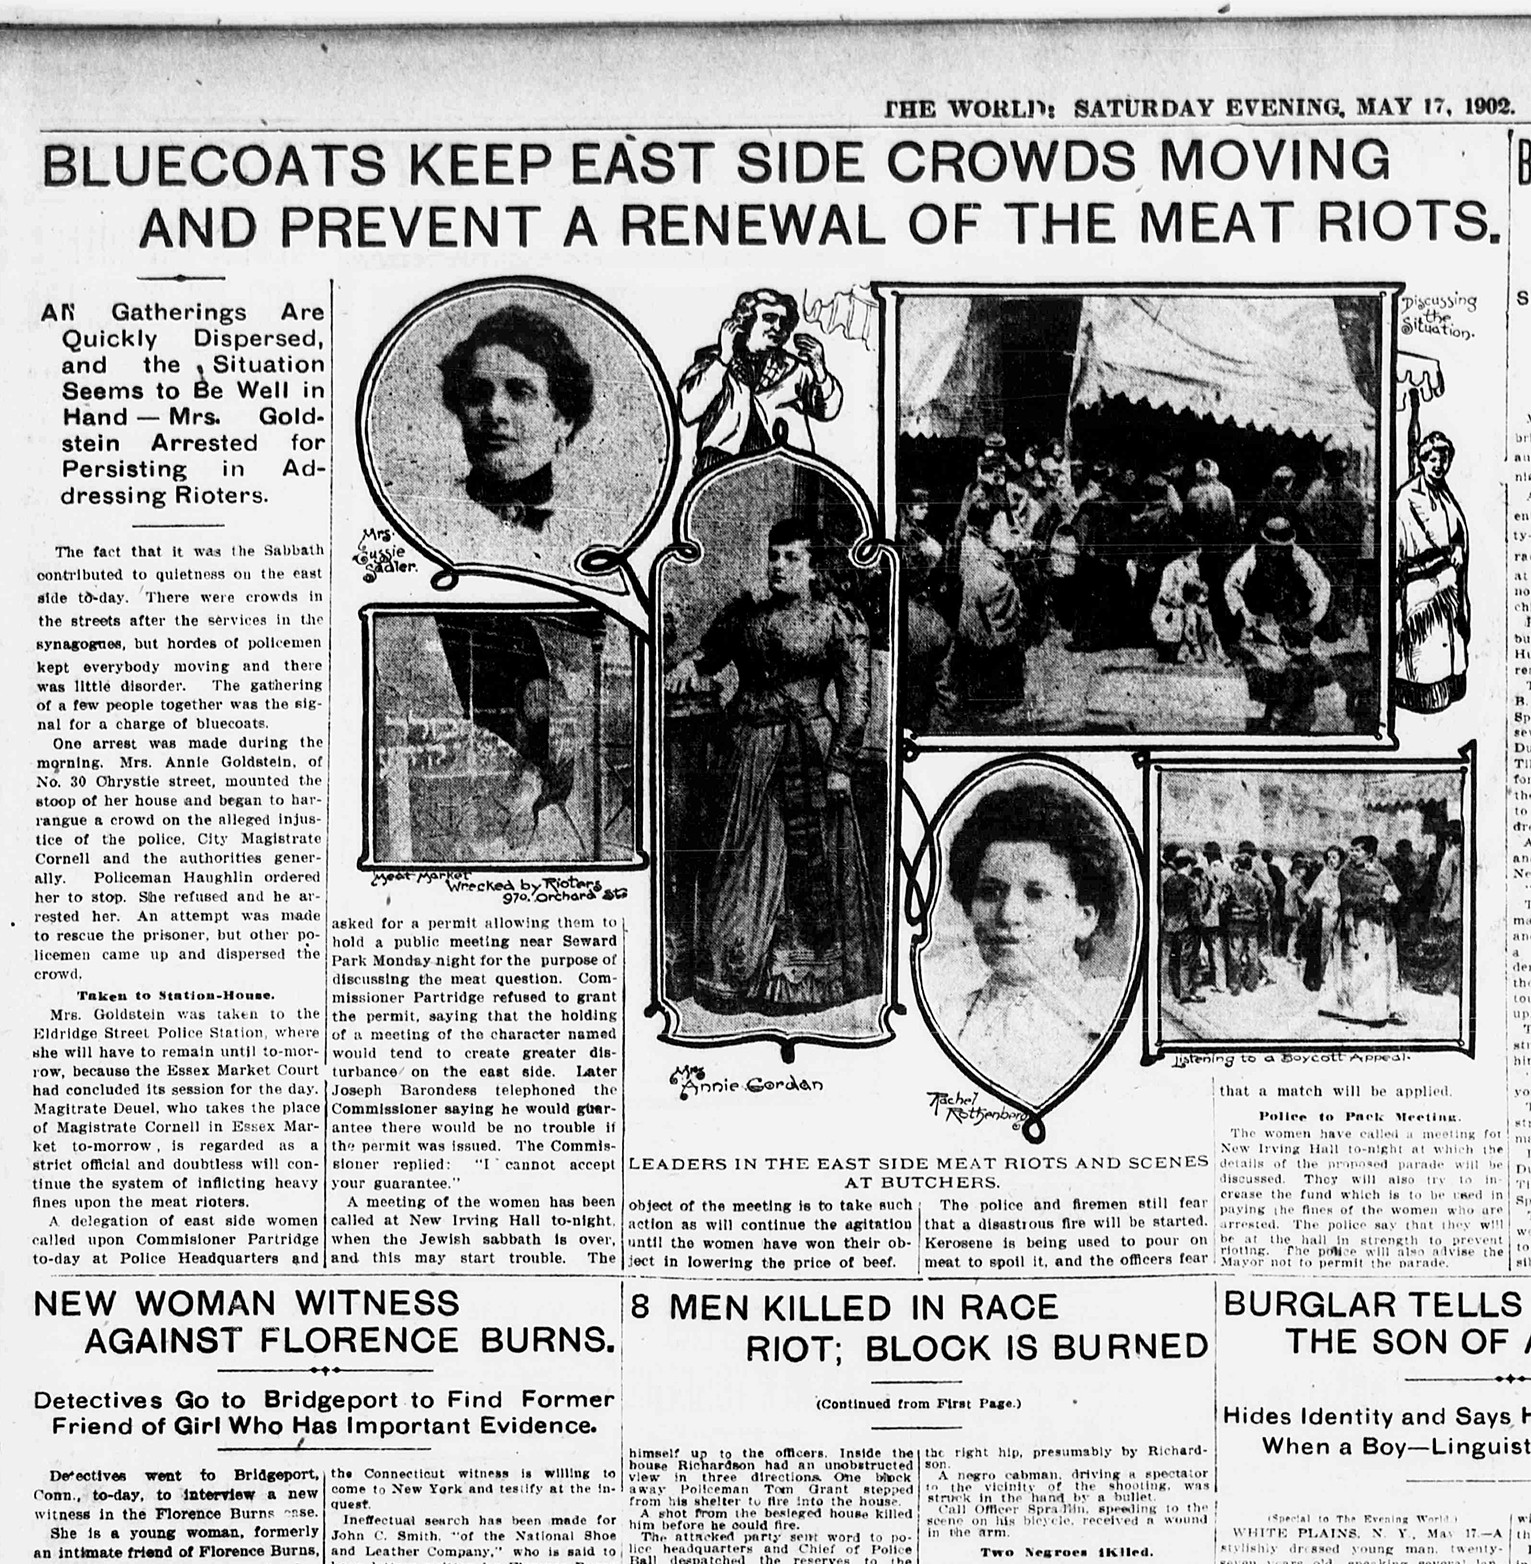 "May 1902" front-page newspaper article about the Kosher Meat Boycott with pictures of Jewish female leaders of the "Riots and Scenes at Butchers"